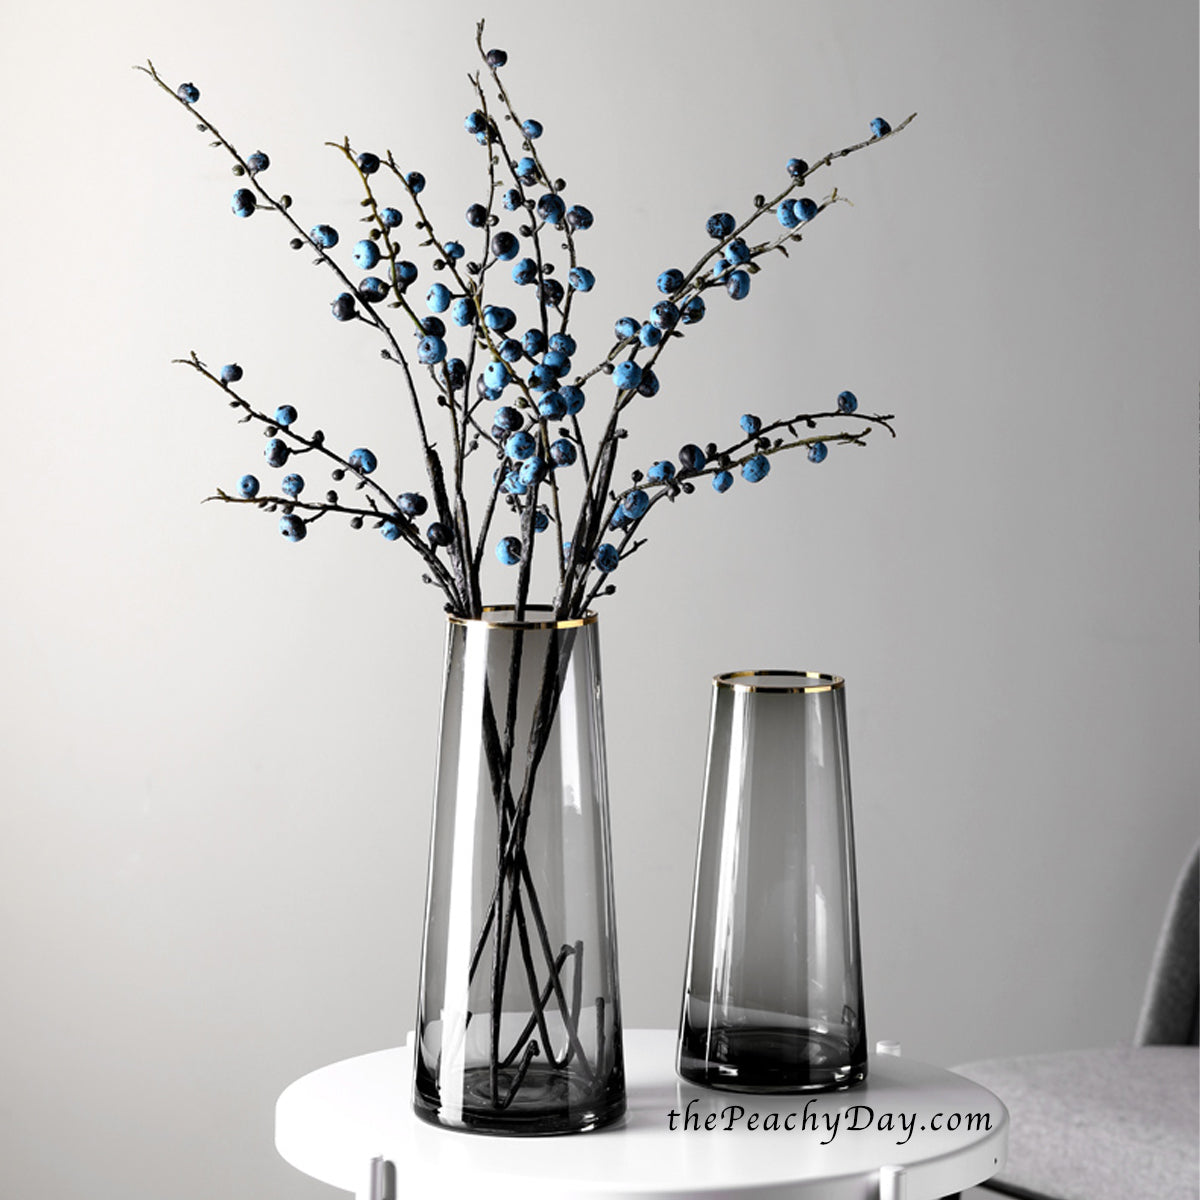 Smoked Grey Glass Vase with Gold Rim